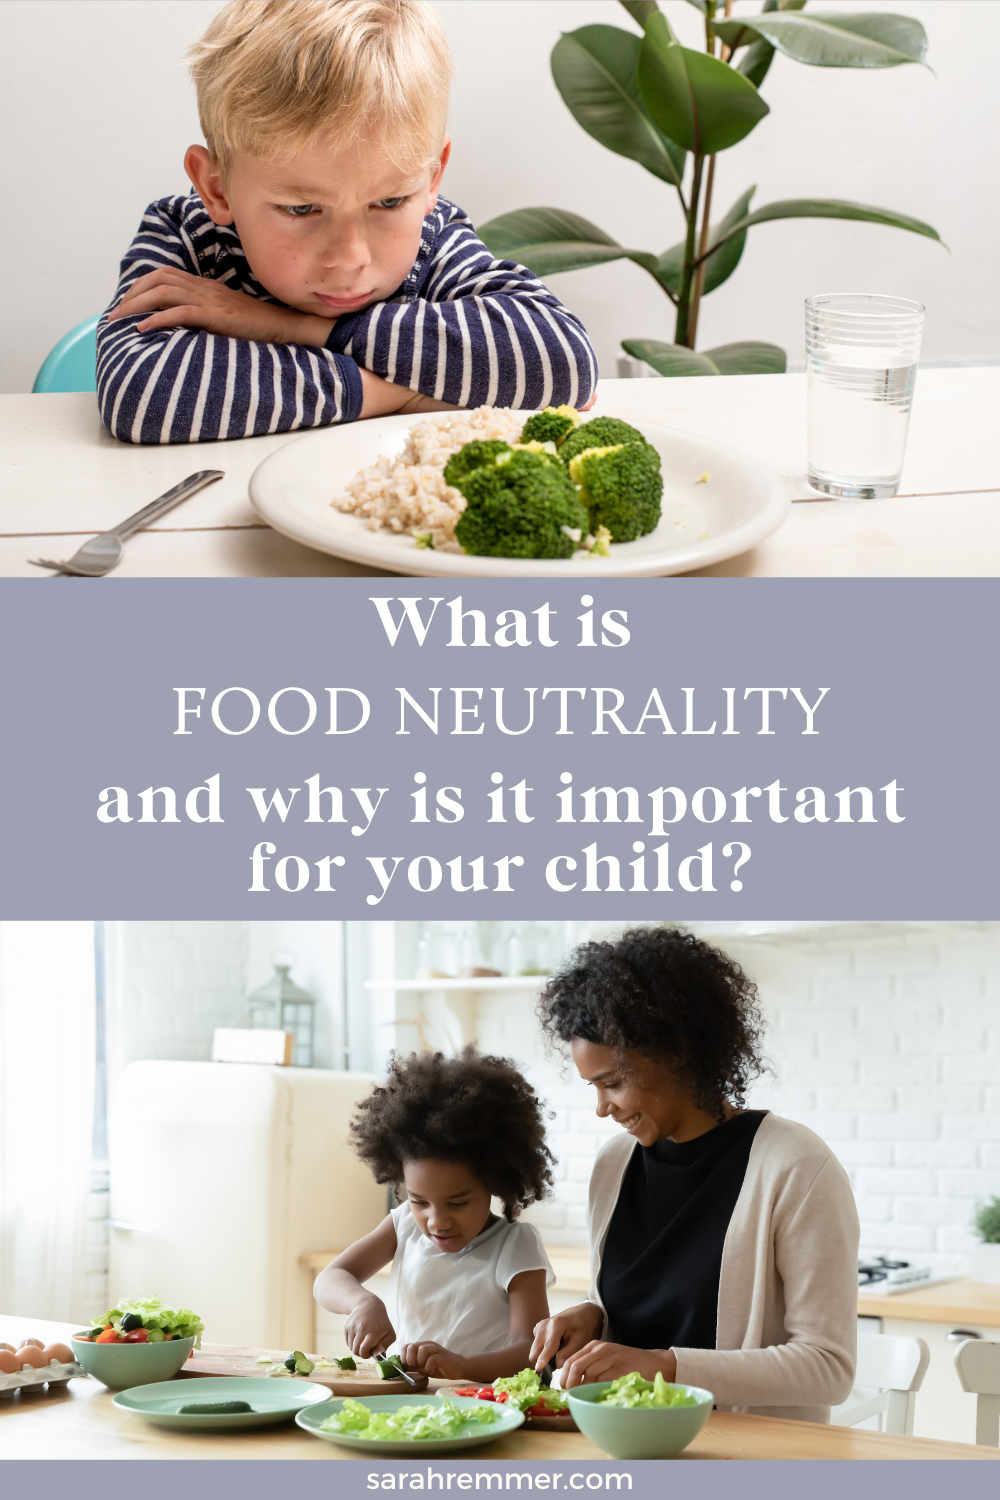 If you want to raise children who have a positive relationship with food and body, creating food neutrality at home is important. Here’s how to do it.